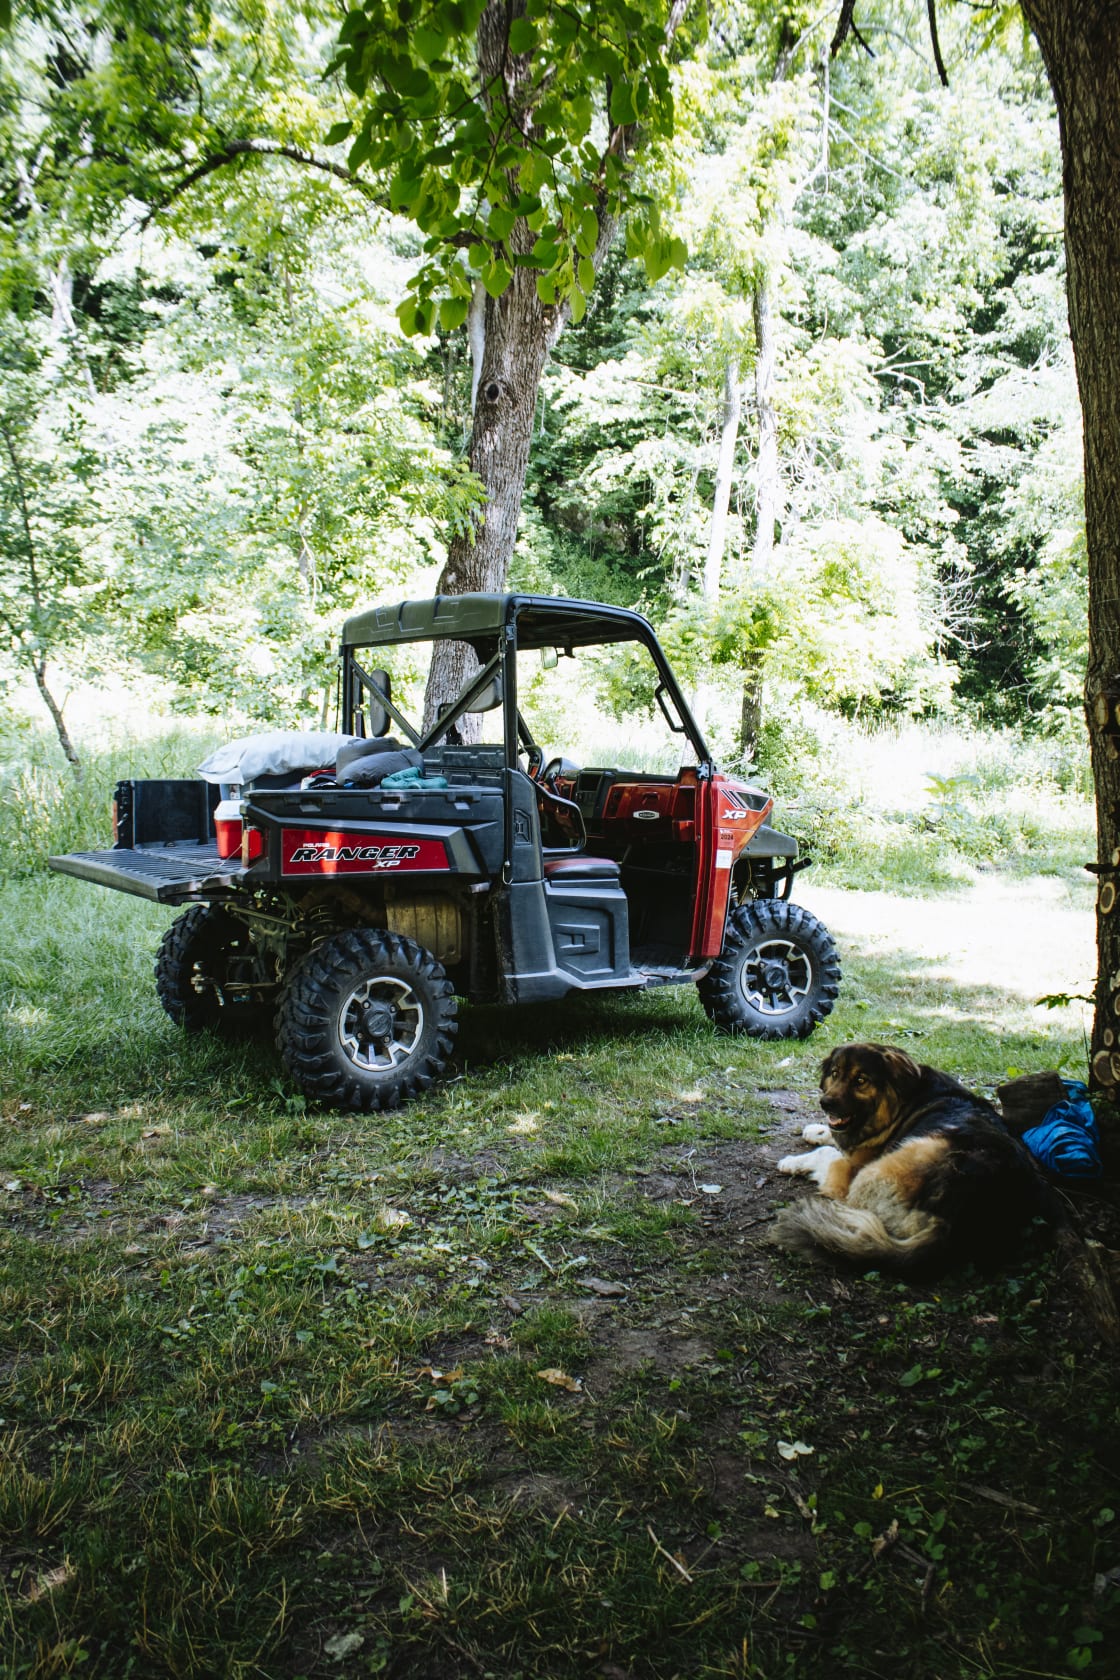 Highly recommend adding on the utv assist to get your gear down to your site. The ride also gave Lynn a chance to share a bit about the property with me! 